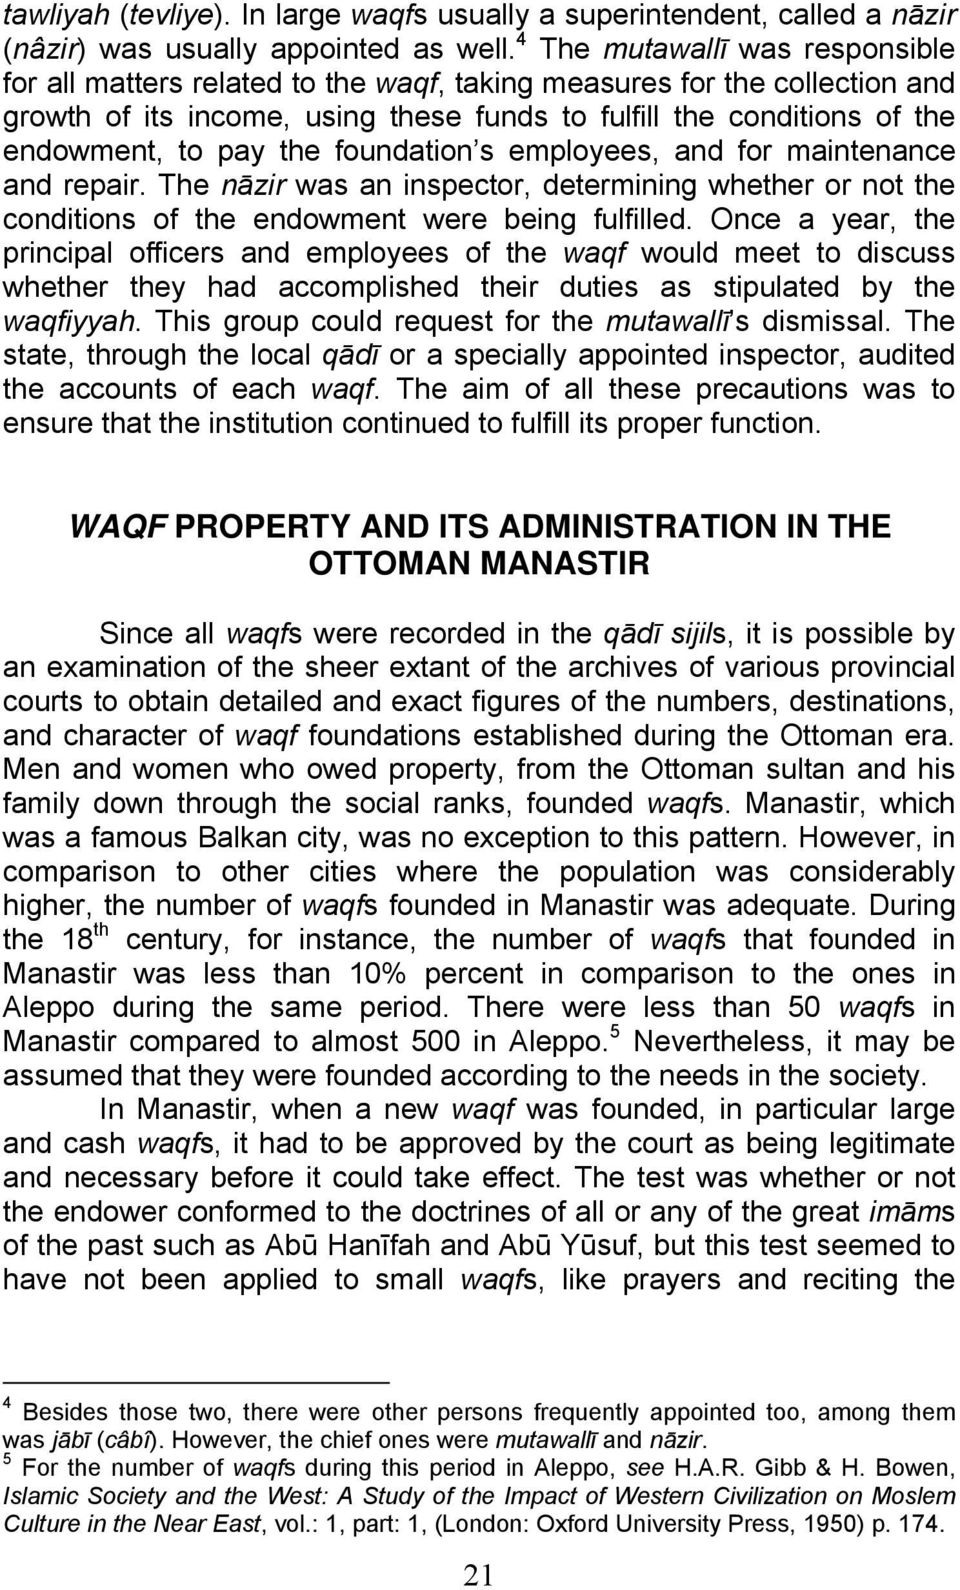 the foundation s employees, and for maintenance and repair. The nāzir was an inspector, determining whether or not the conditions of the endowment were being fulfilled.